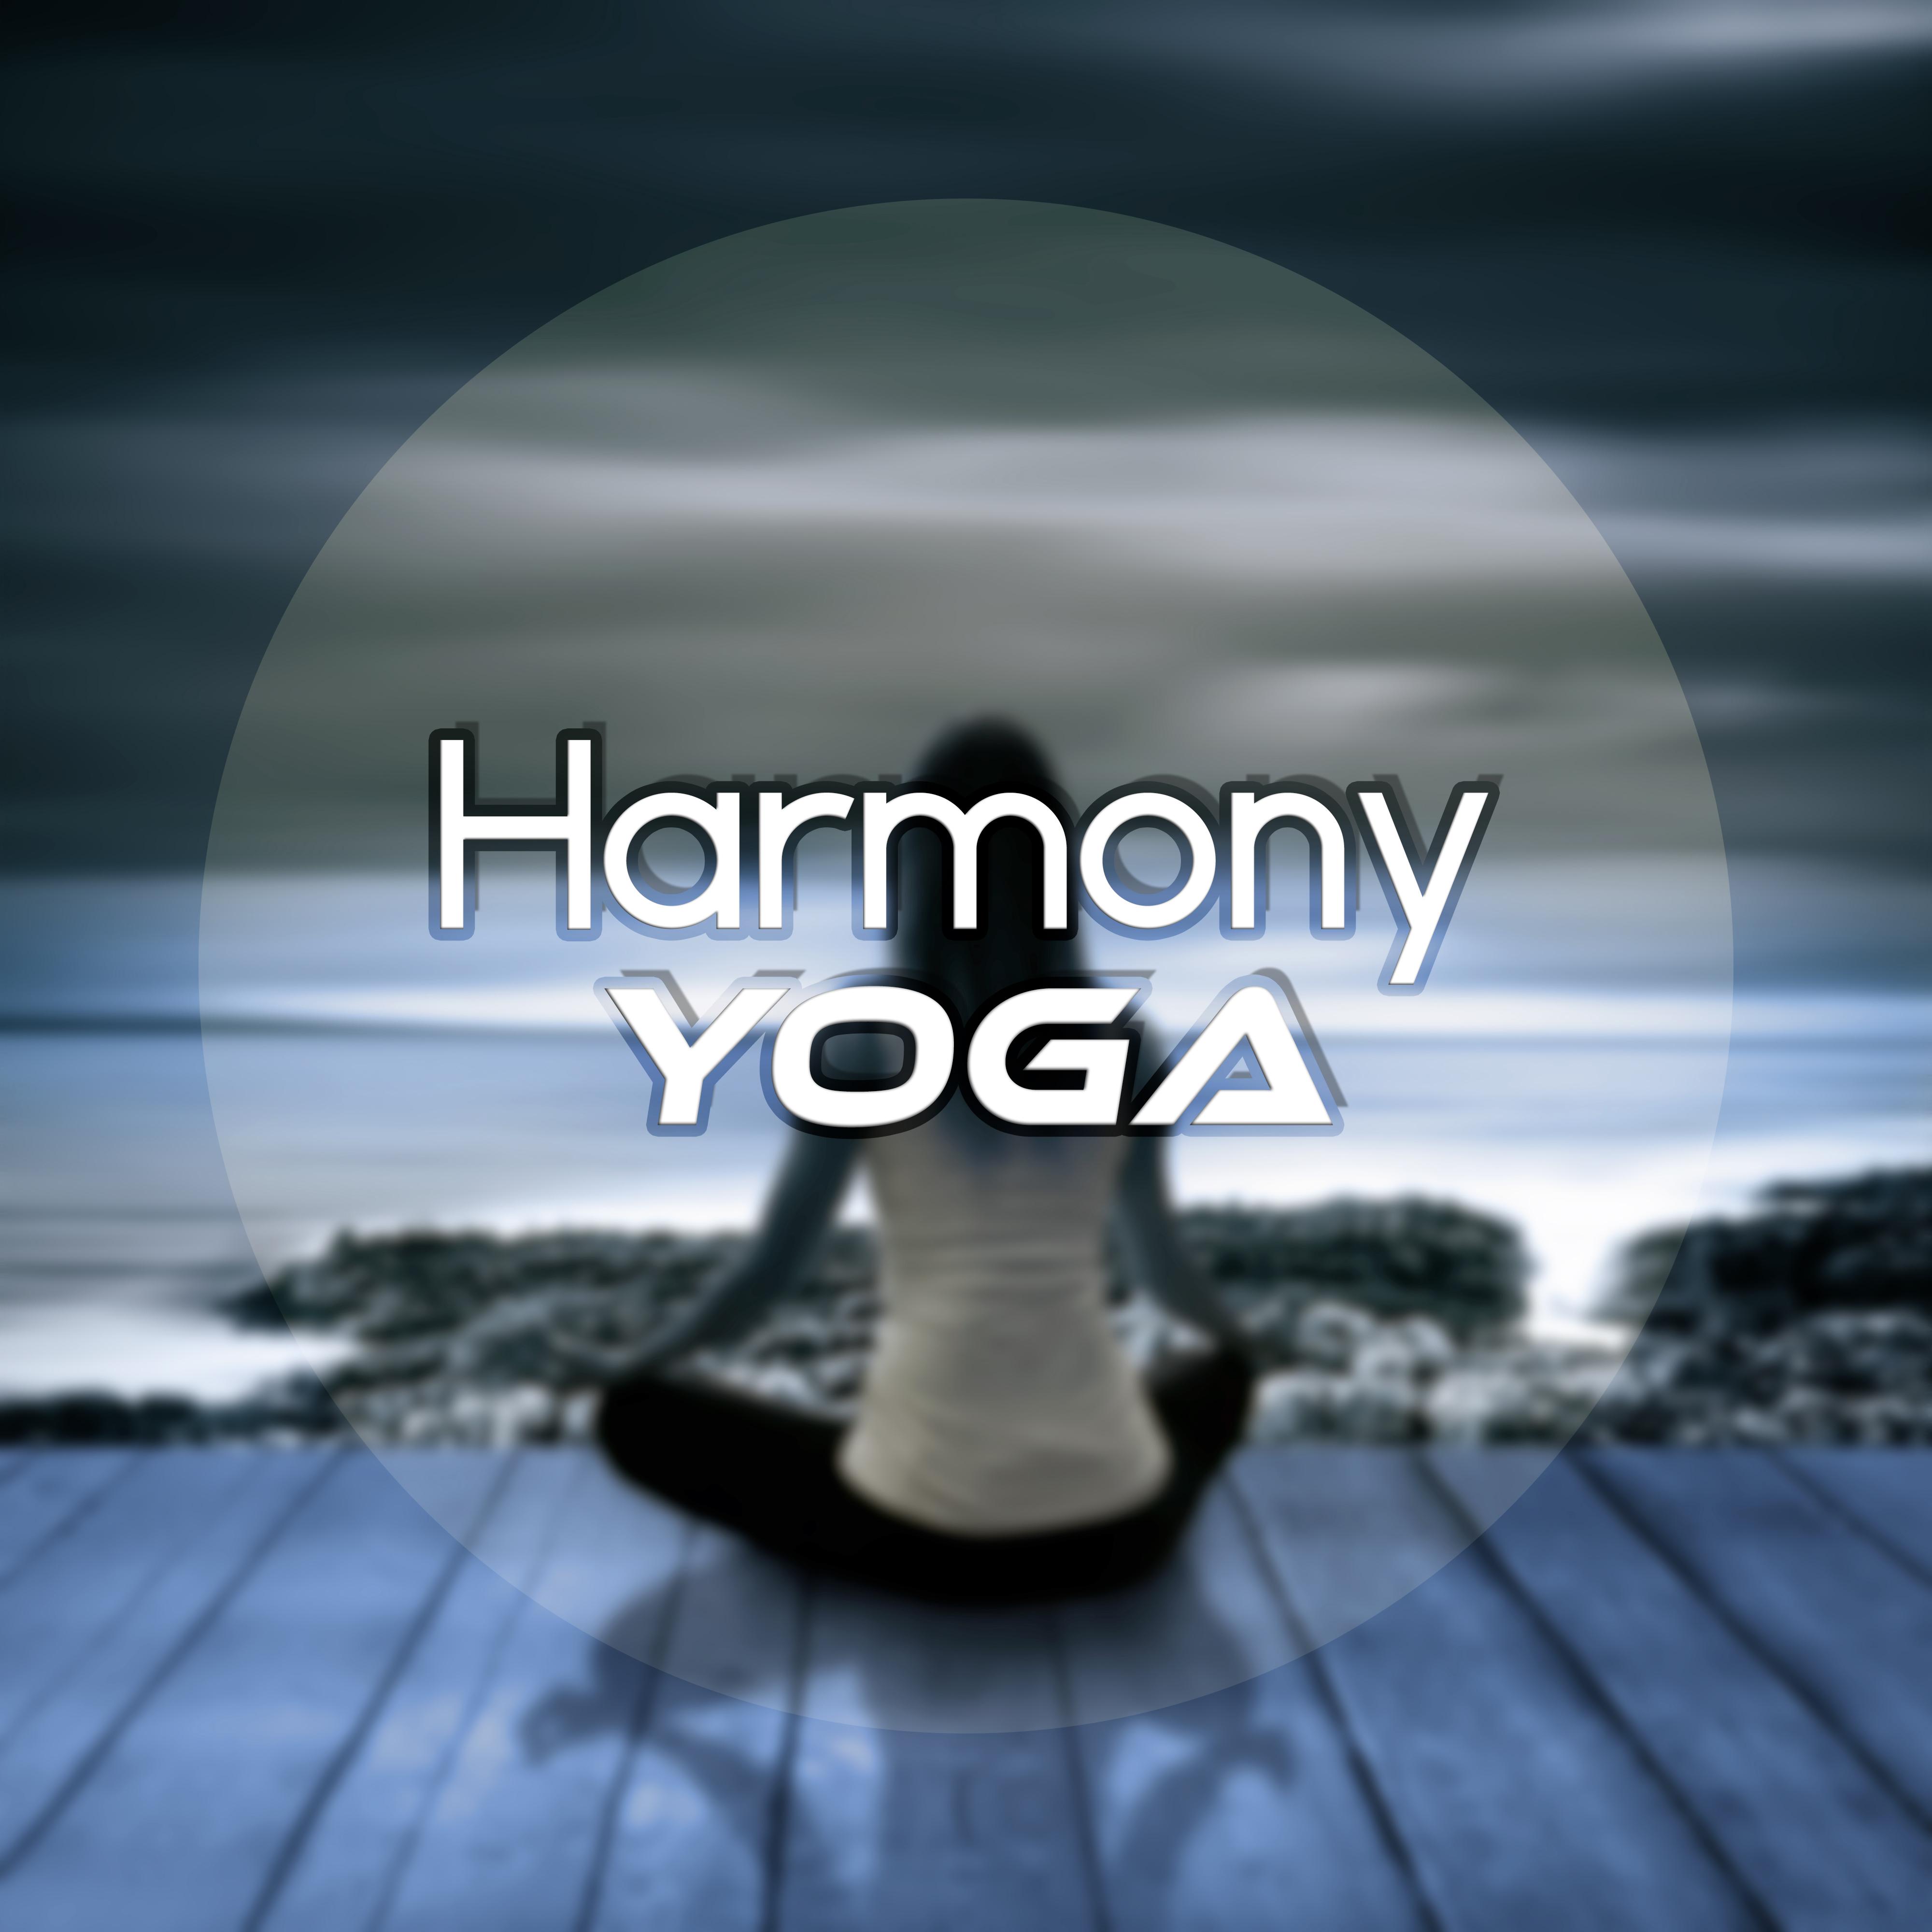 Harmony Yoga - Lounge Music for Therapy, Serenity Spa, Healing Massage, Meditation & Relaxation, Music and Pure Nature Sounds, Stress Relief, Calm Music